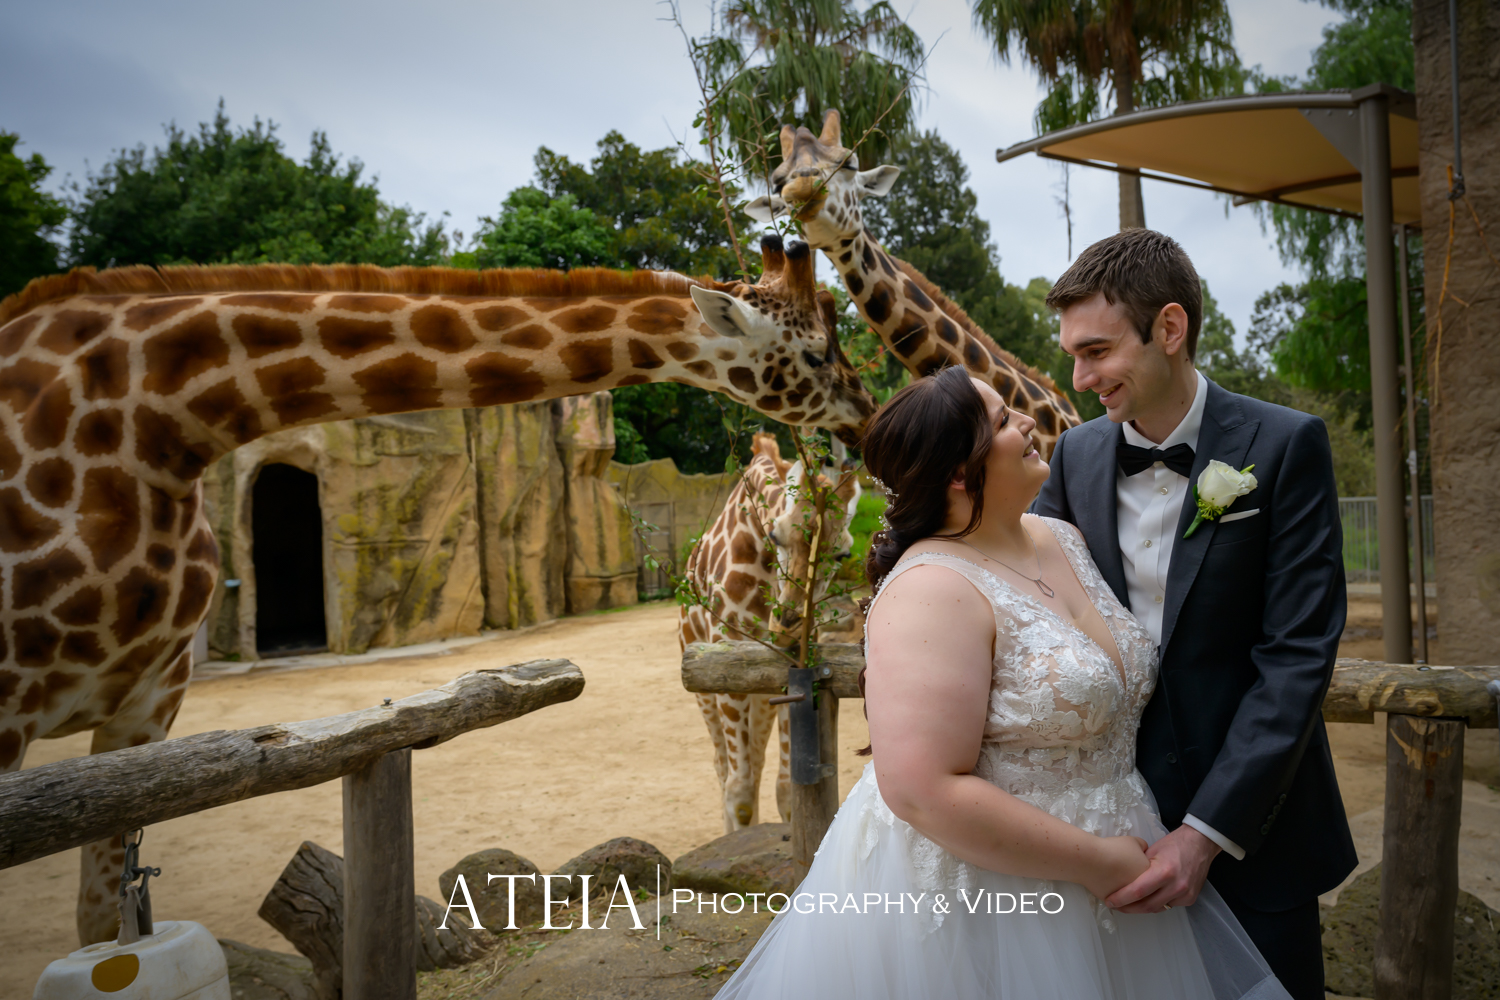 , Rhiannon and Chris&#8217; wedding photography at Melbourne Zoo captured by ATEIA Photography &#038; Video